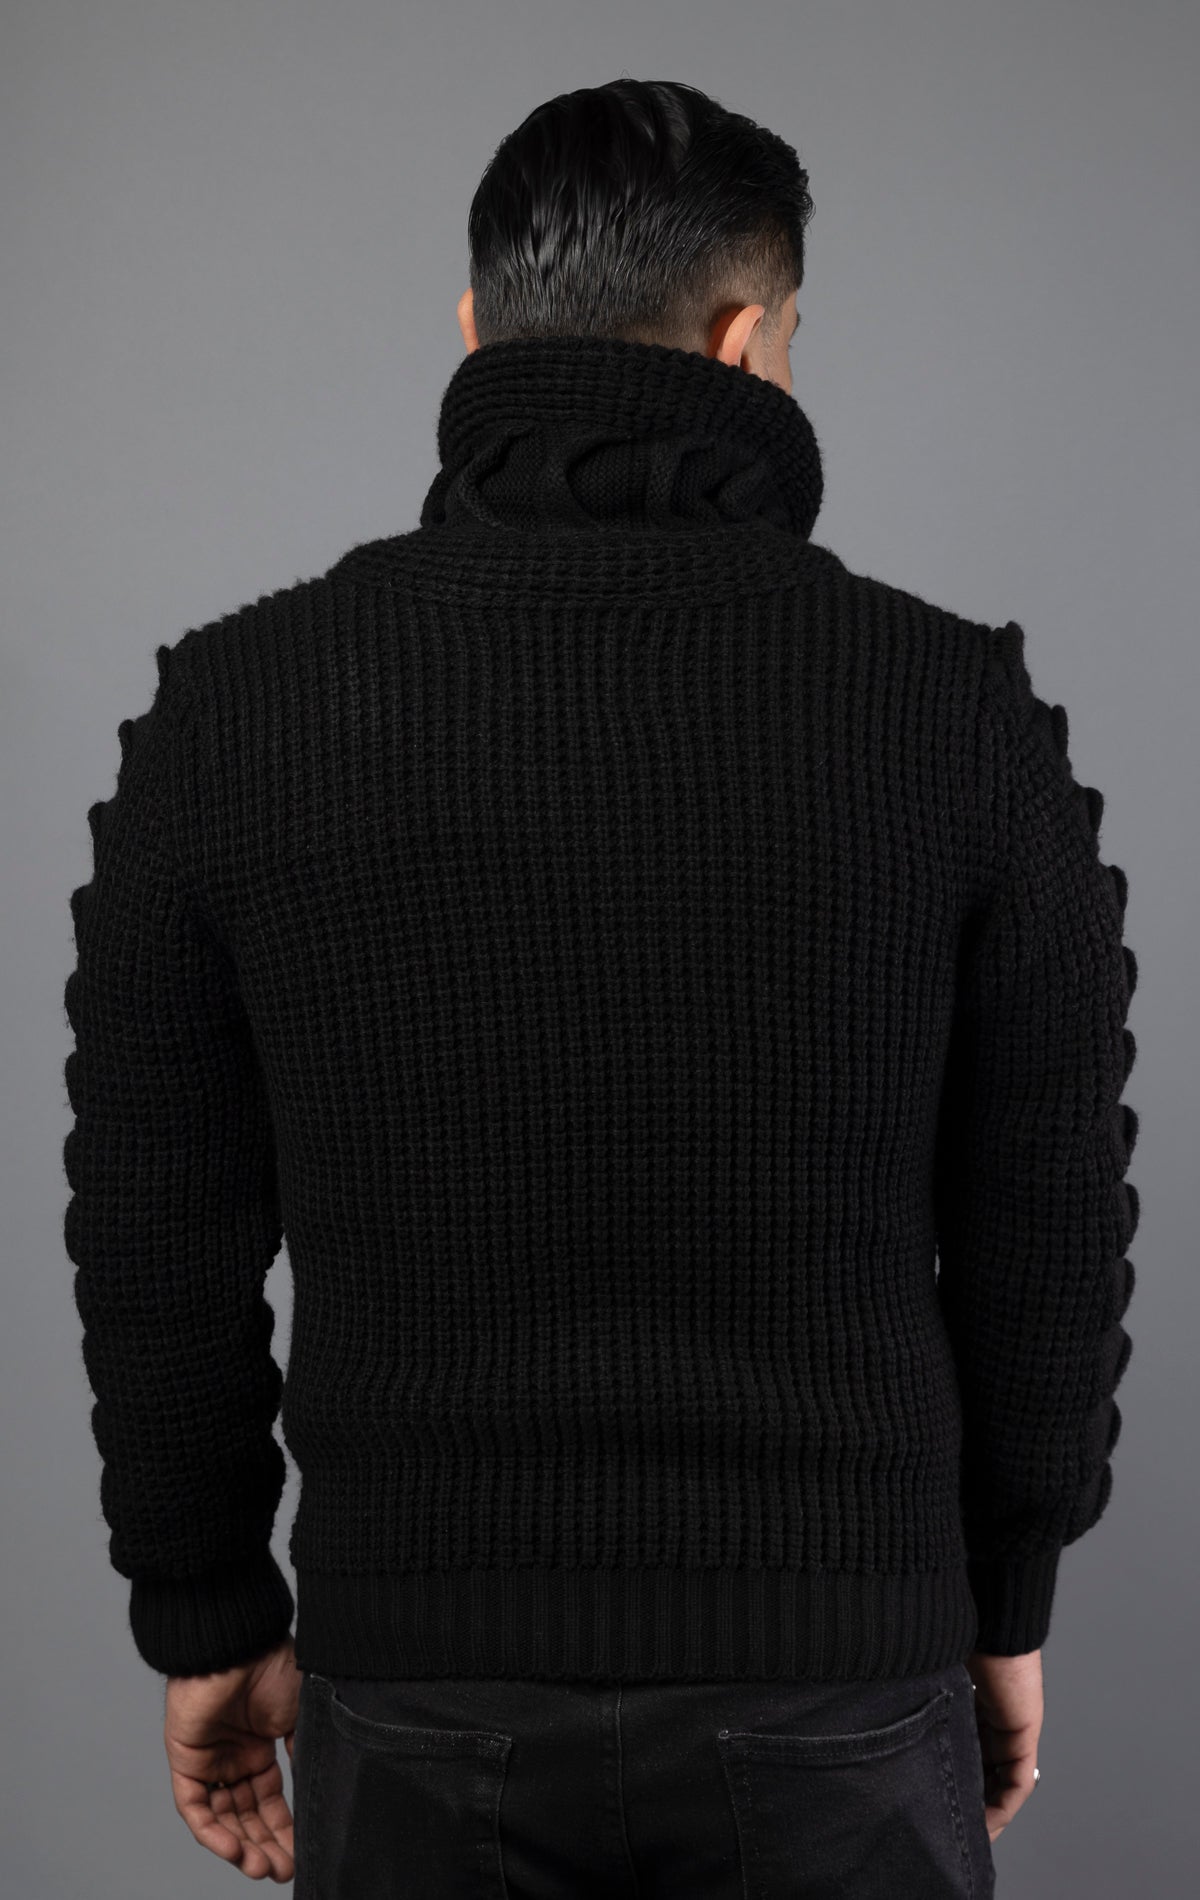 Model wearing black versatile, high-quality sweater designed with heavy weight material to be worn in multiple ways